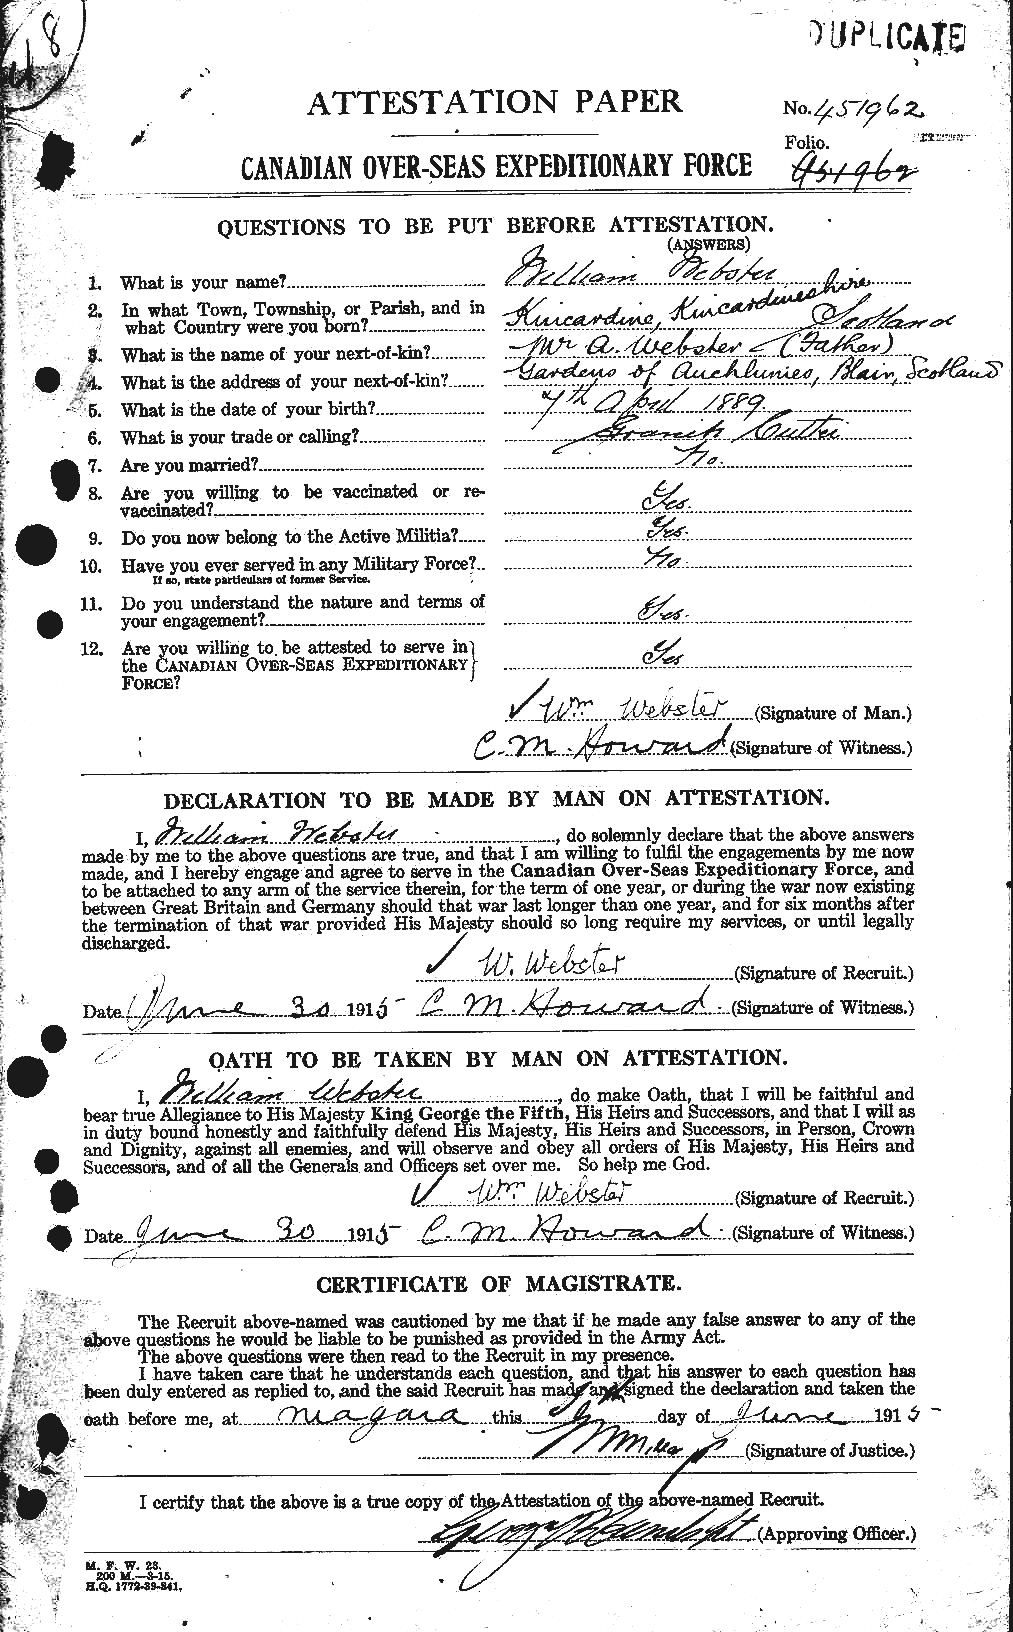 Personnel Records of the First World War - CEF 662013a